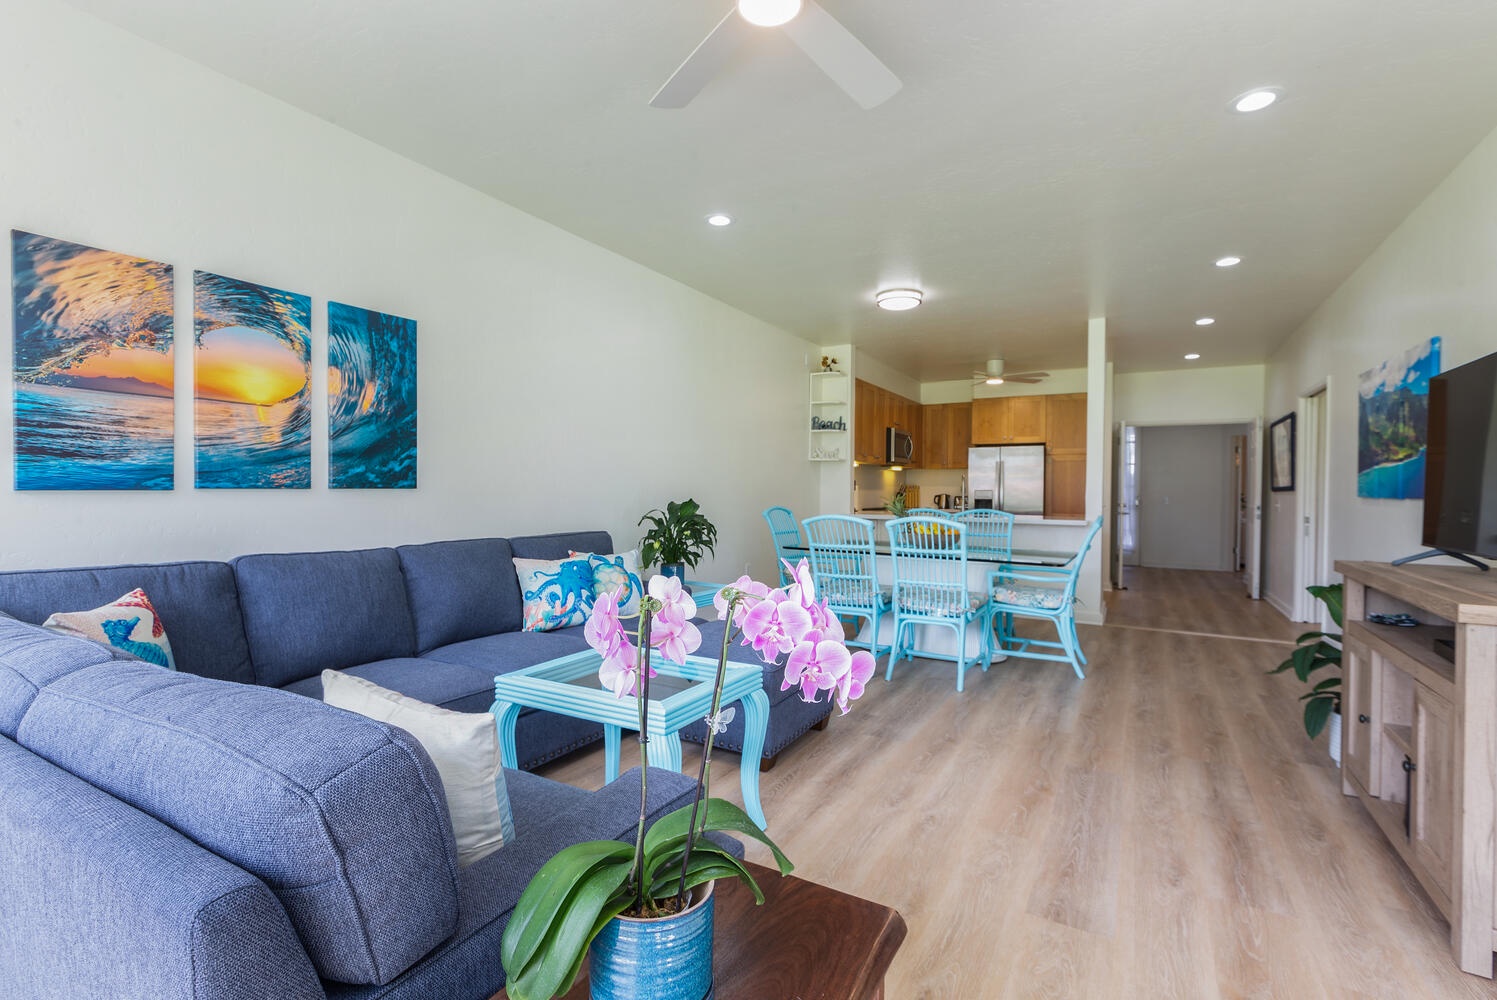 Princeville Vacation Rentals, Emmalani Court 414 - Common space is drenched in gorgeous, natural light